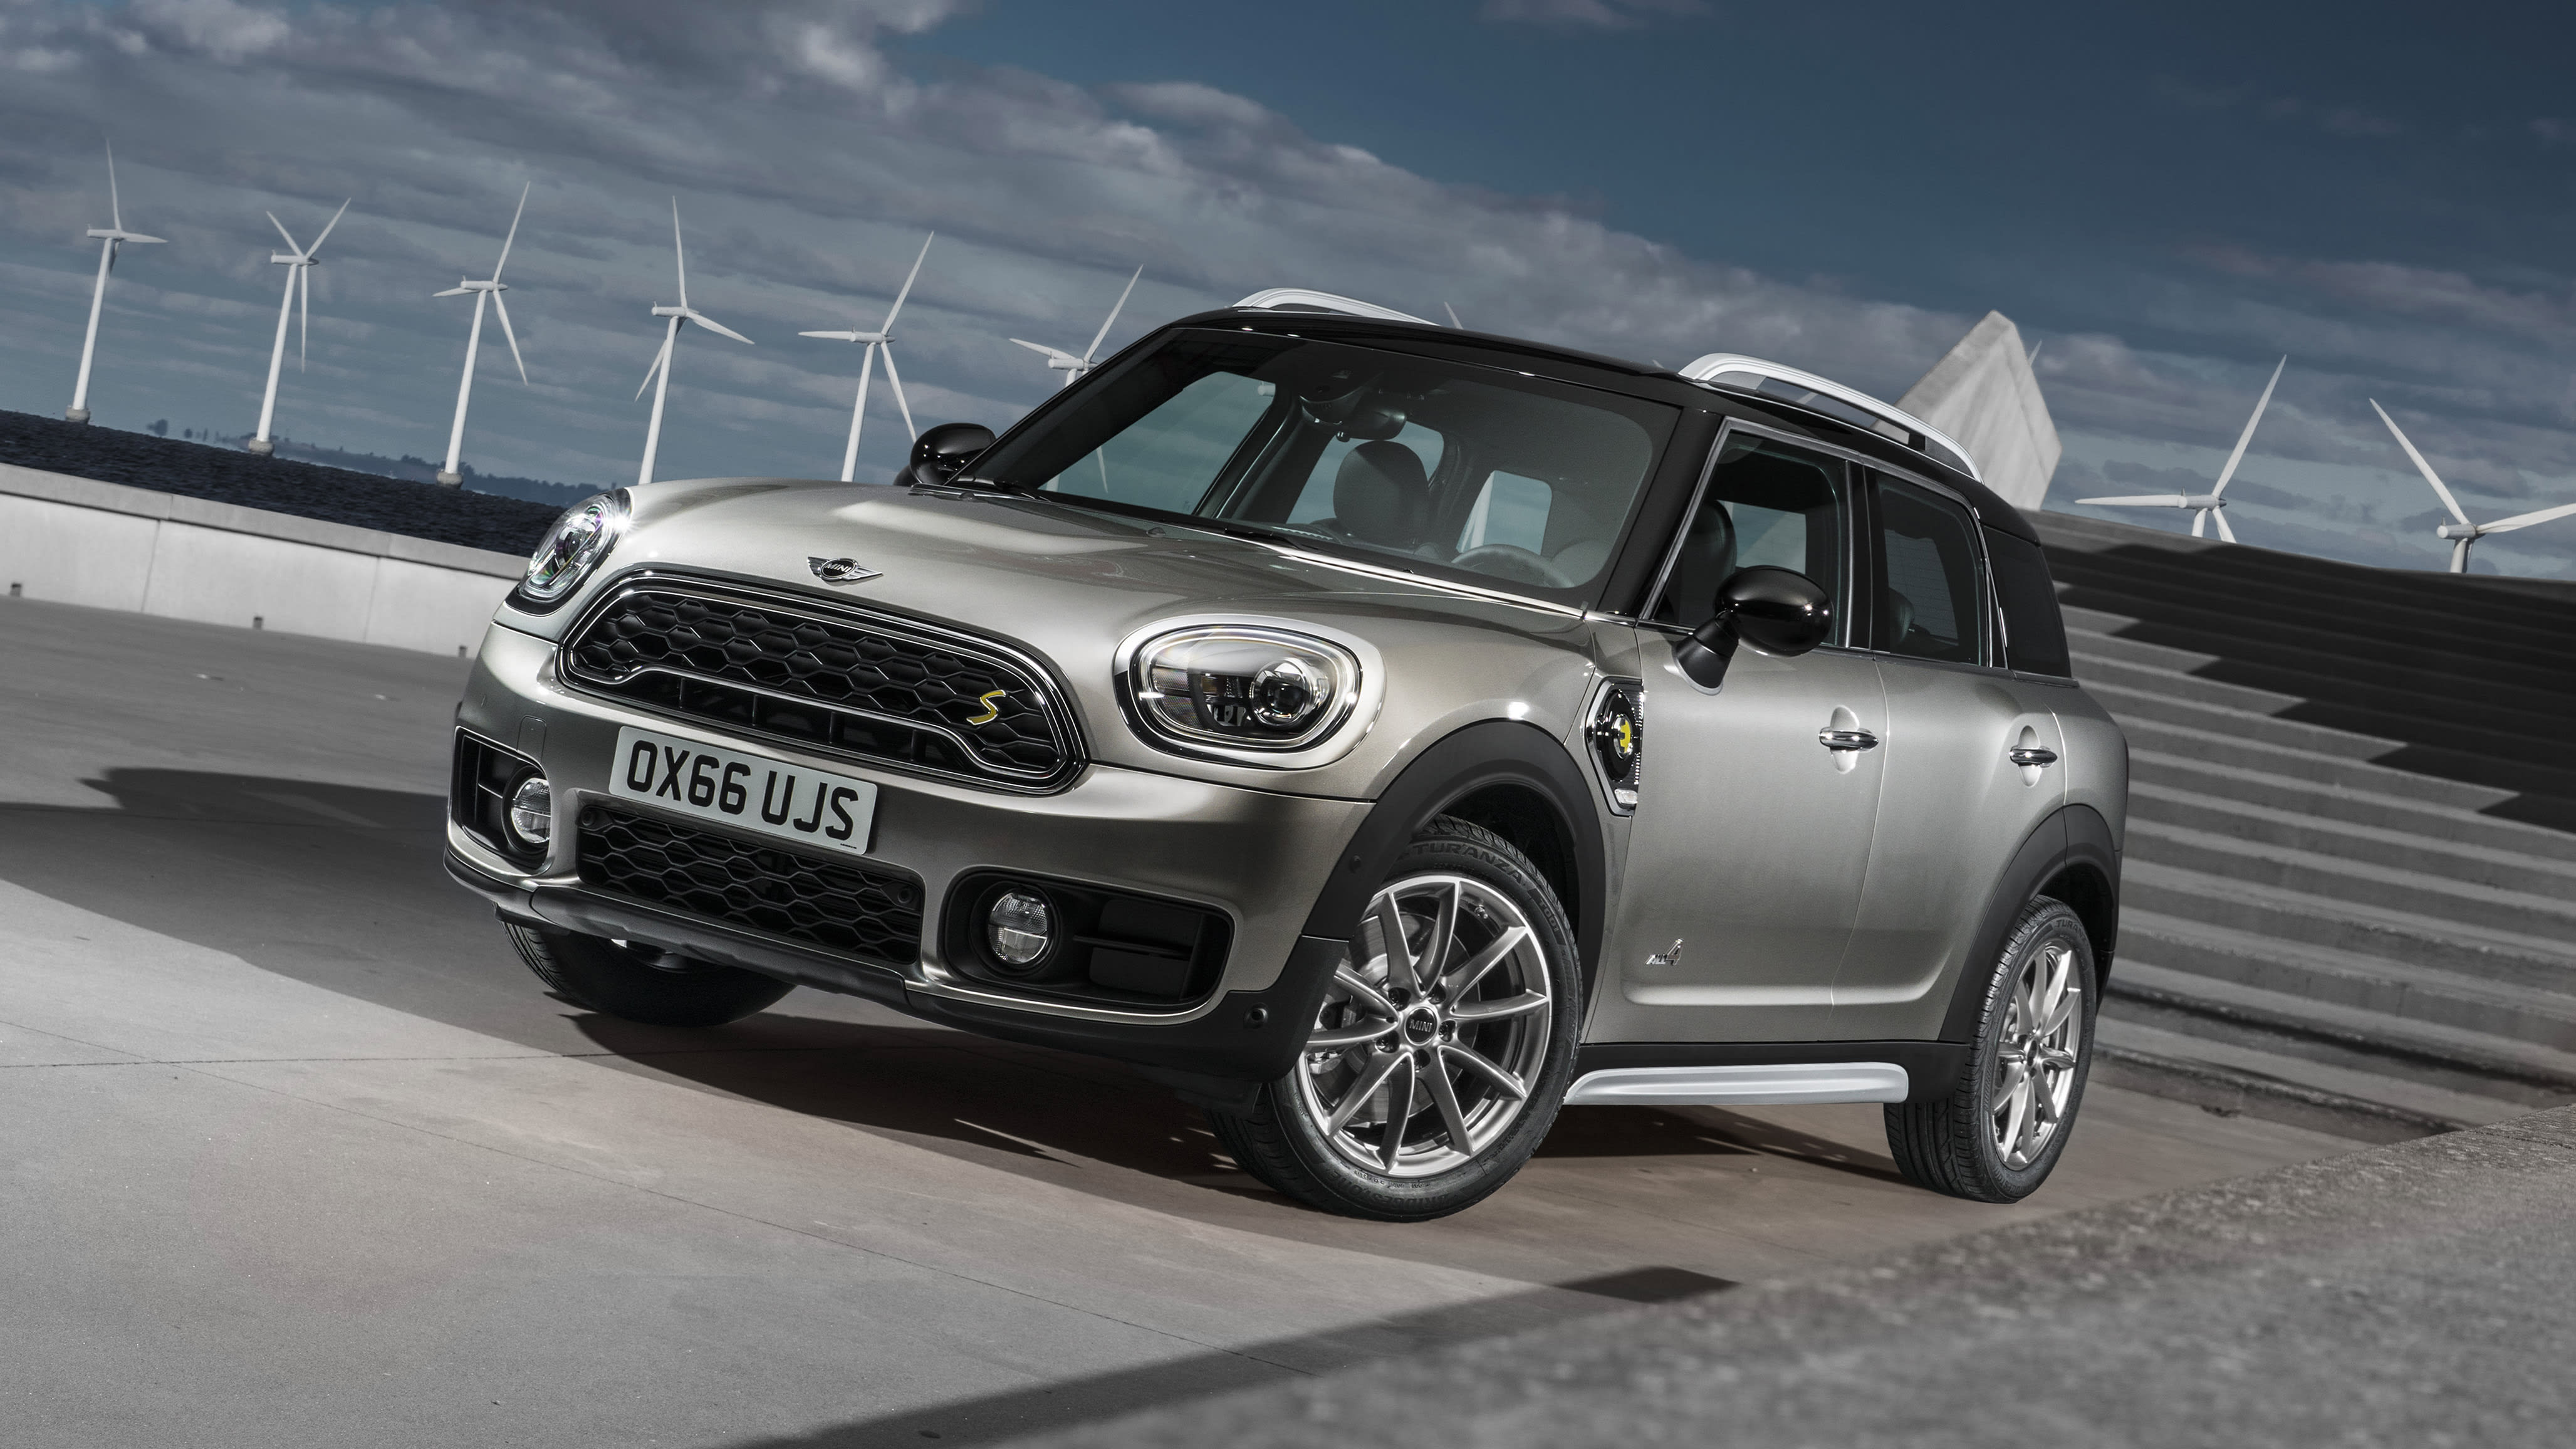 2020 Mini Countryman Review | Price, specs, features and photos - Autoblog